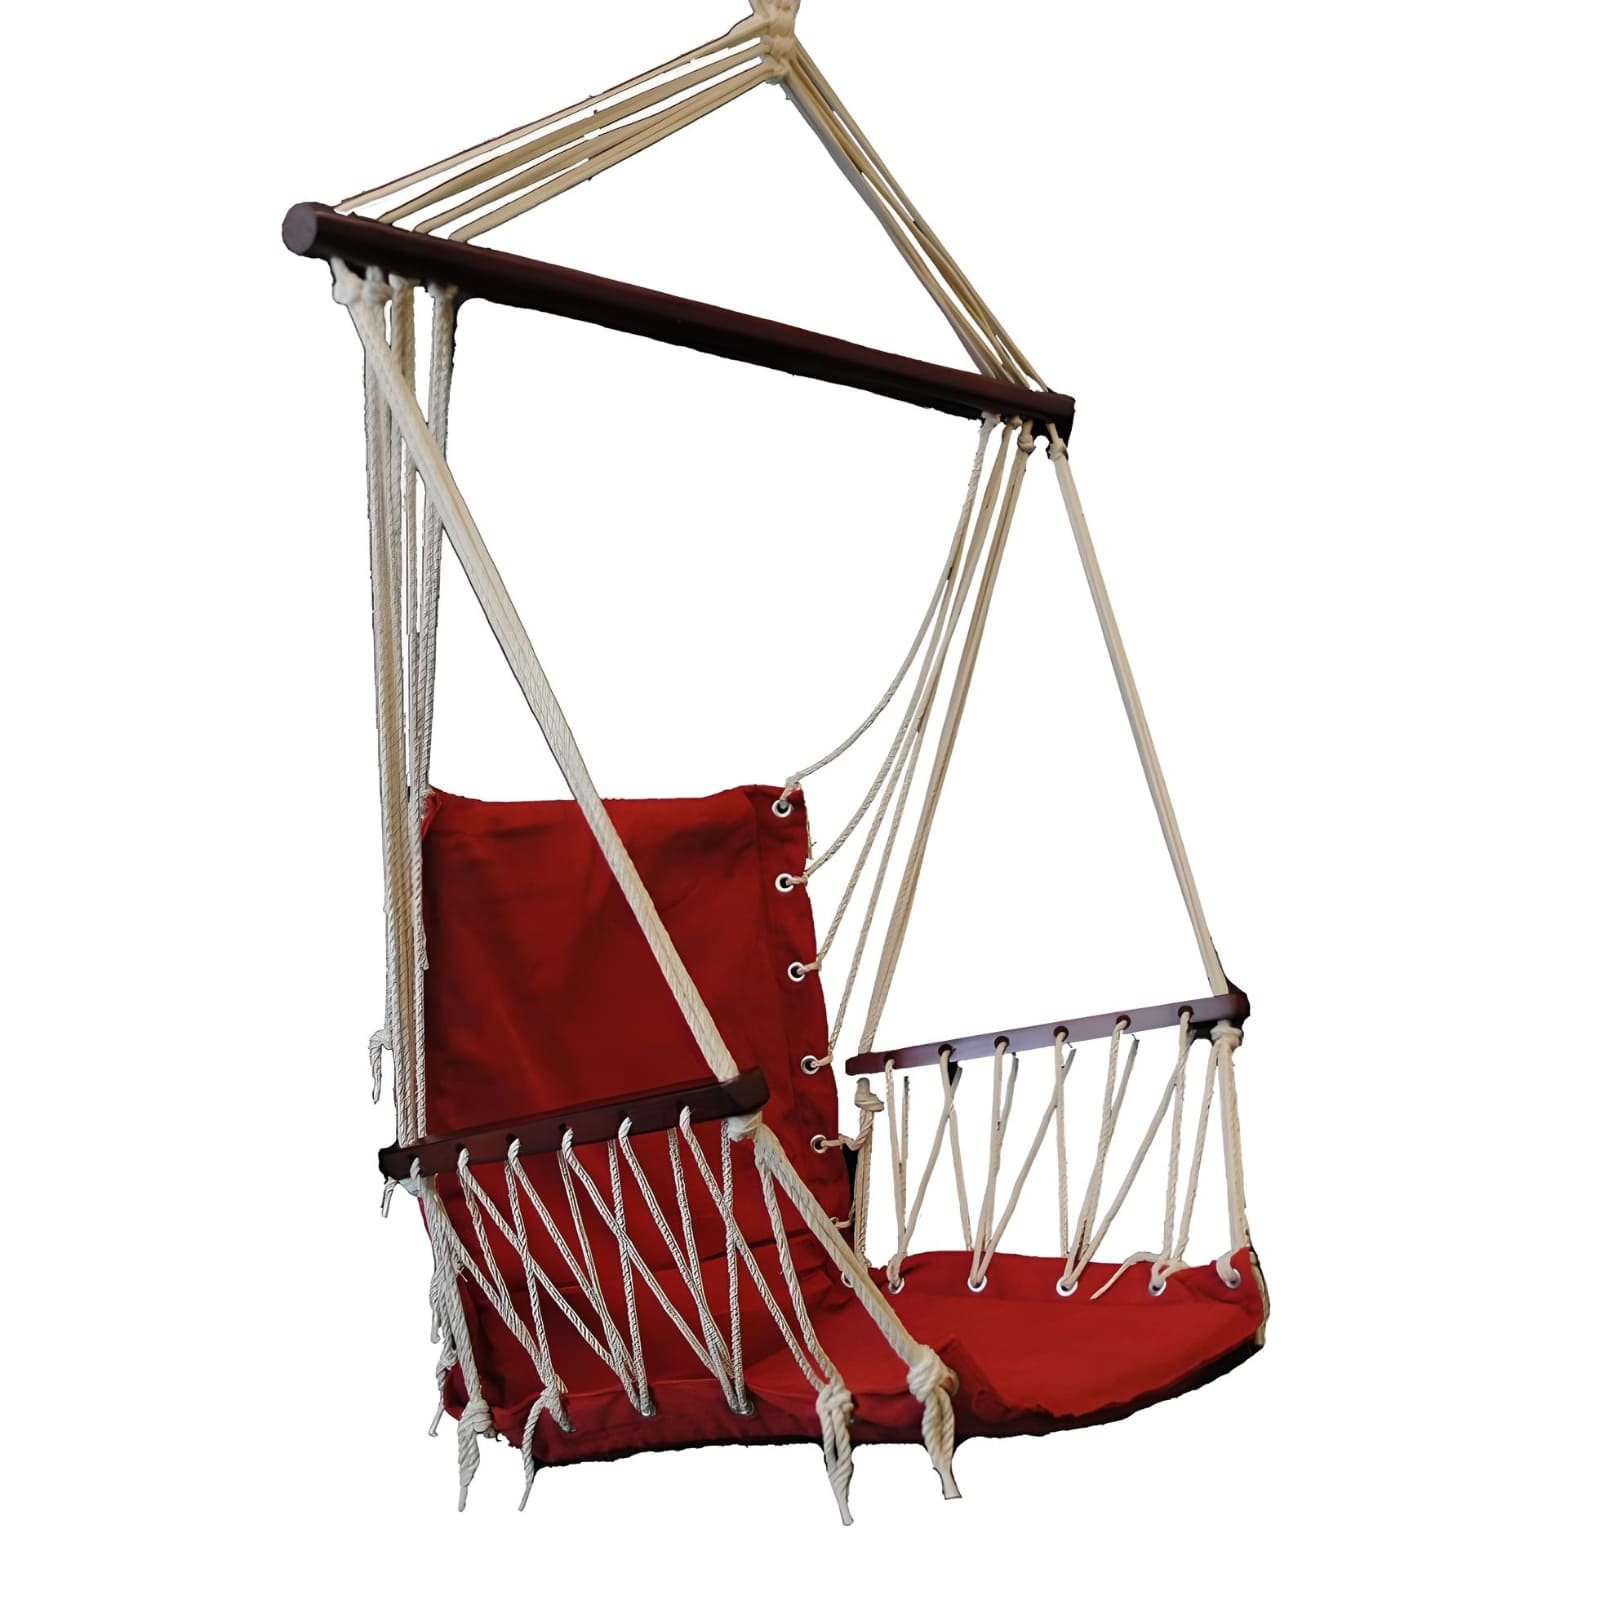 red-in-color-hanging-hammock-chair-with-wooden-arm-rests